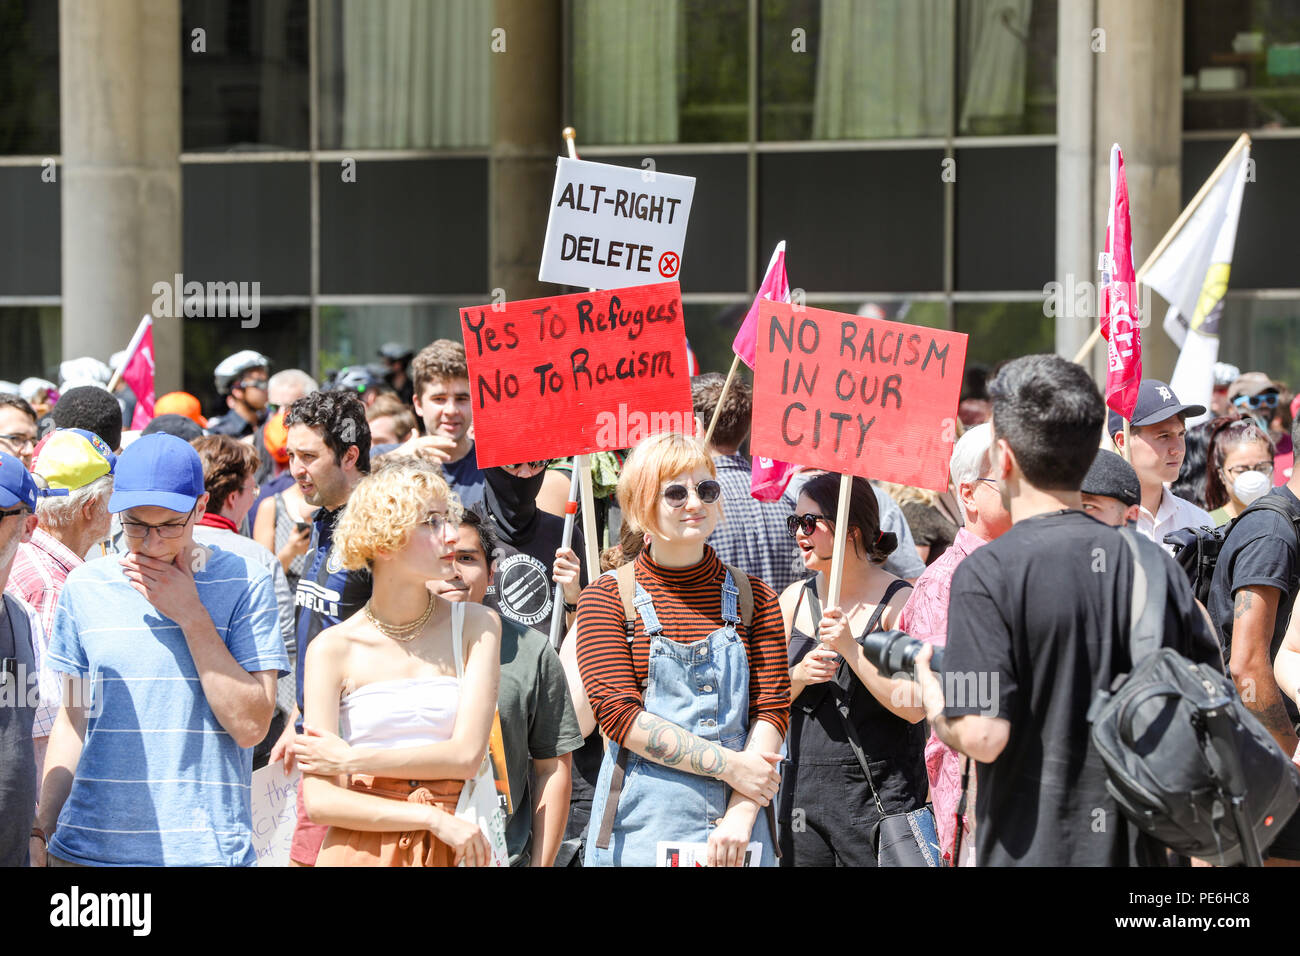 AUGUST 11, 2018 - TORONTO, CANADA: 'STOP THE HATE' ANTI RACISM RALLY. Stock Photo